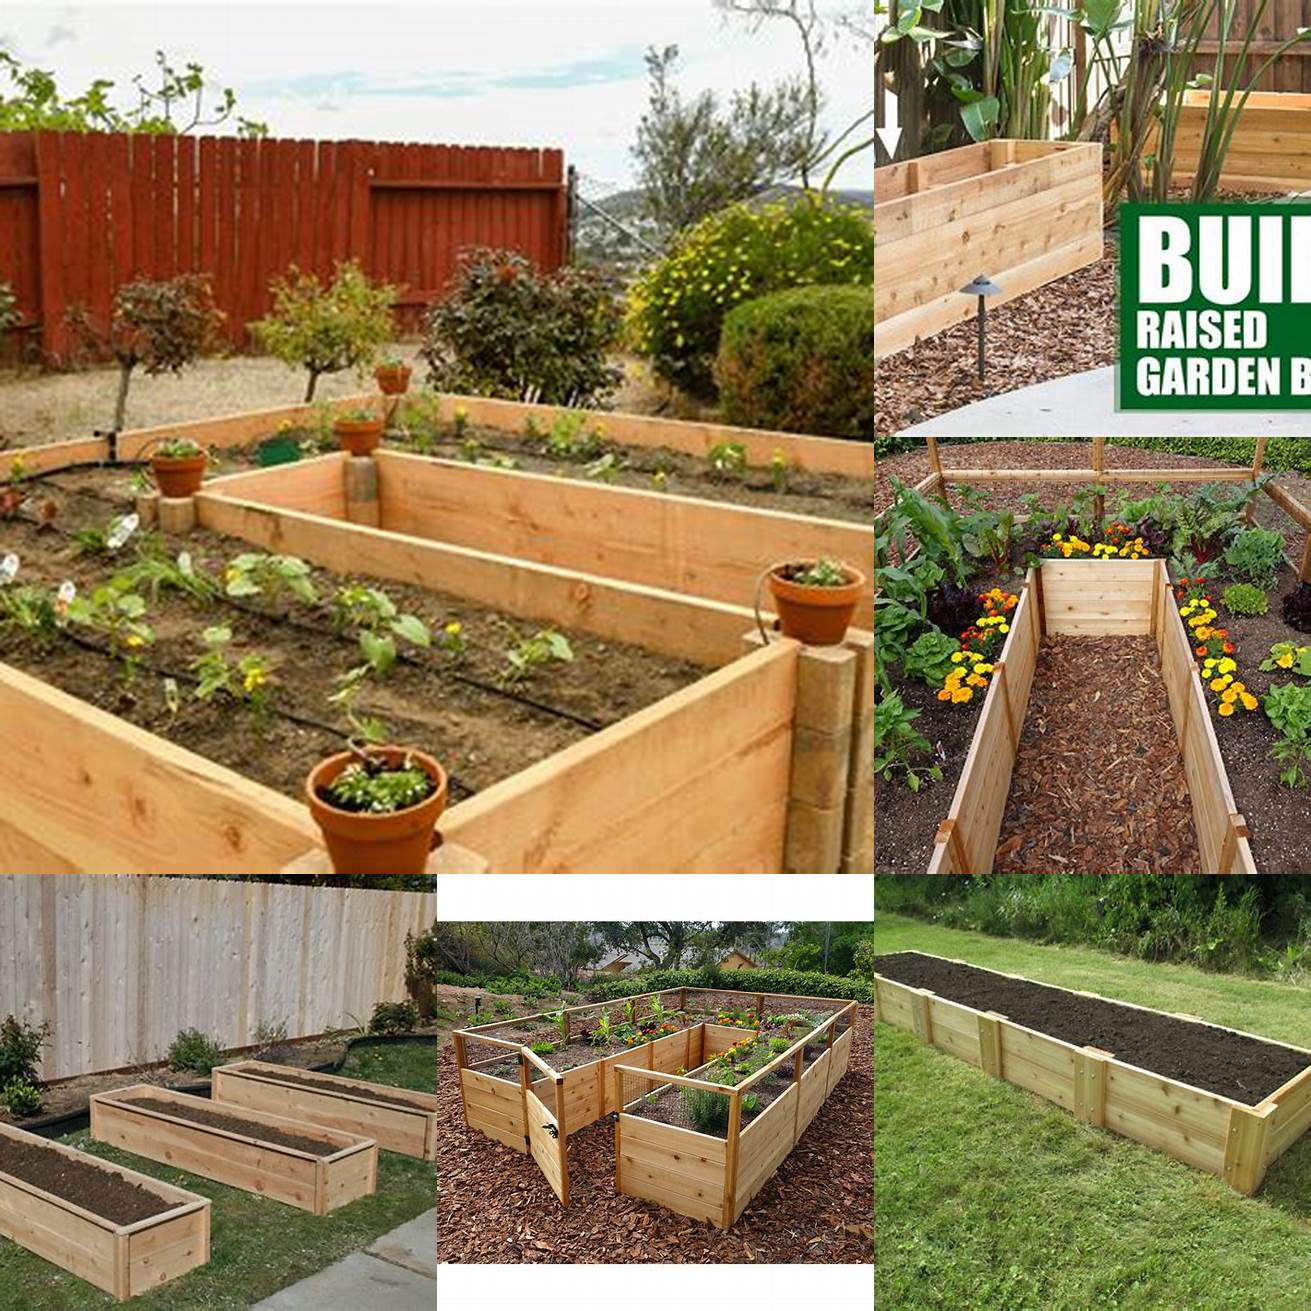 Clean Regularly Cedar Raised Garden Beds can accumulate debris over time